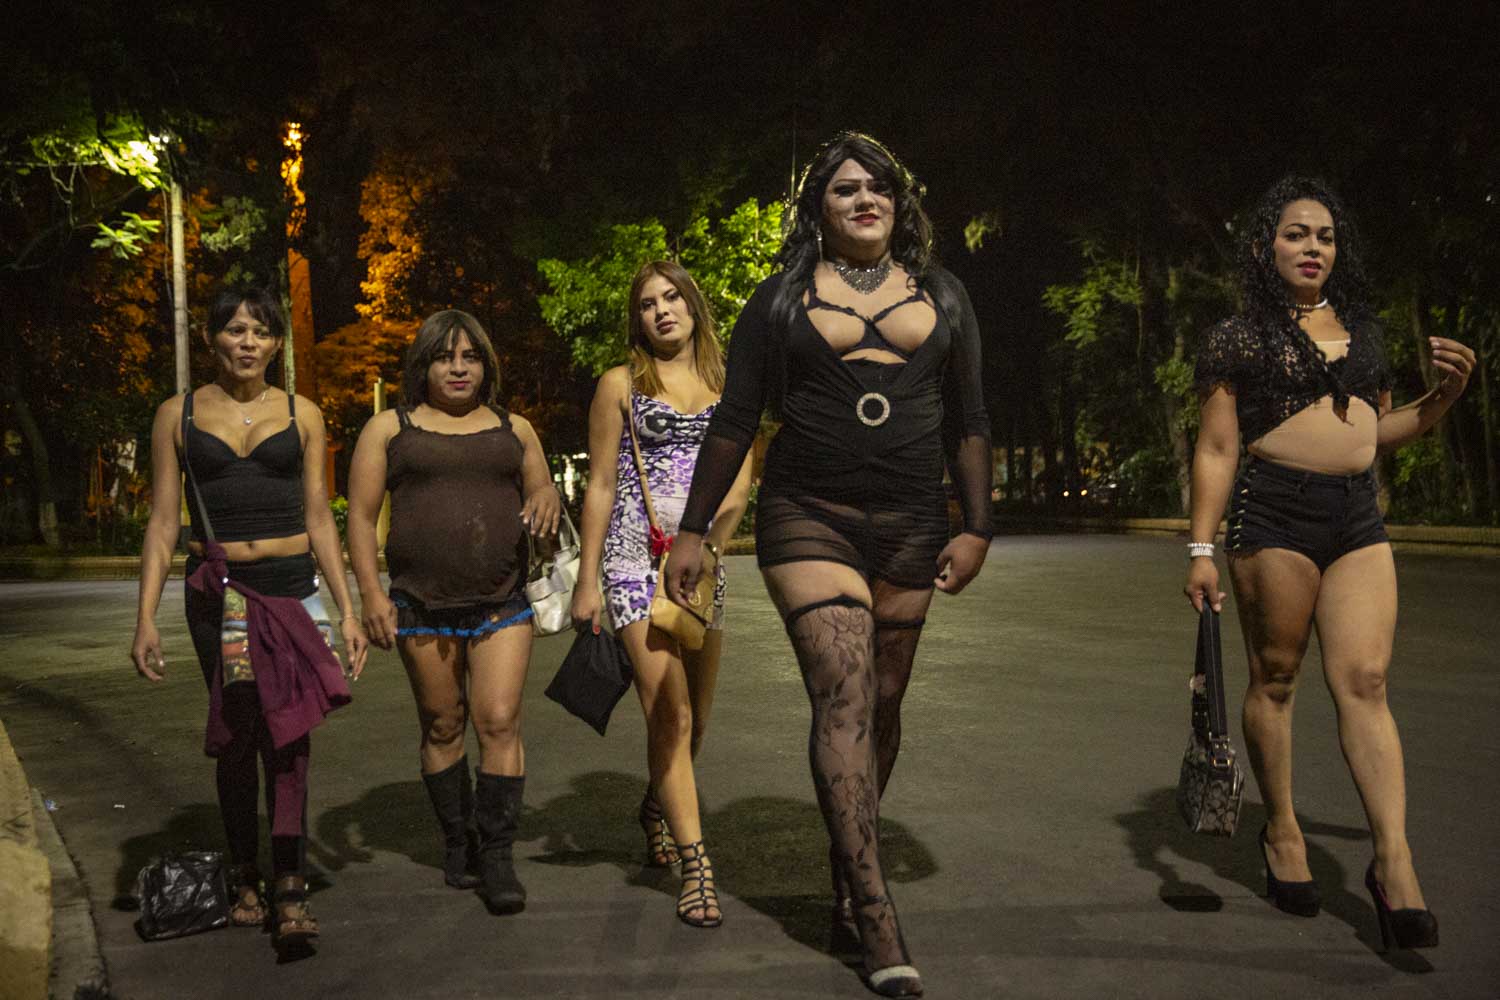  Ruby, JLO and other members of the LGBT orgnisation Arcoiris walk to their spot in Tegucigalpa they call El Obelisco, where they work during the night in prostitution. It is often  hard for LGBT people to find a job.   